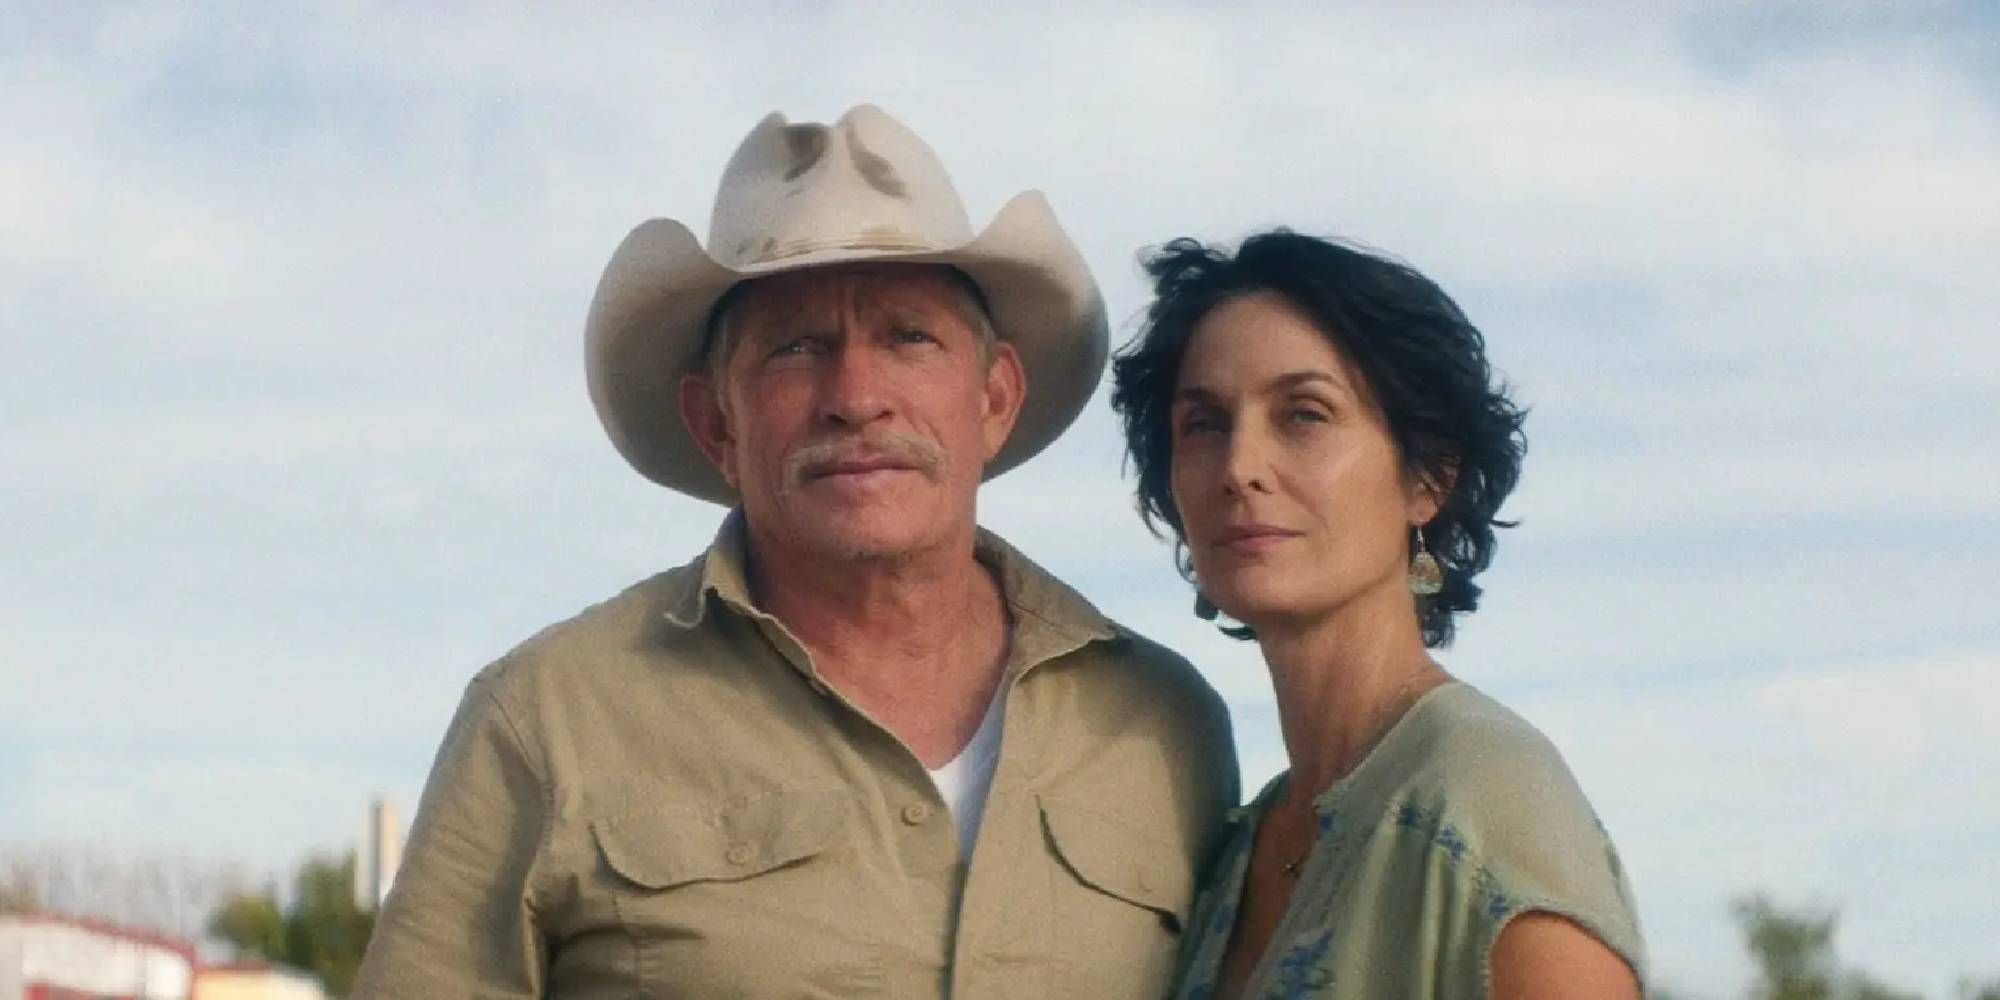 Thomas Haden Church and Carrie-Anne Moss as Merle and Faye standing side by side in Accidental Texan